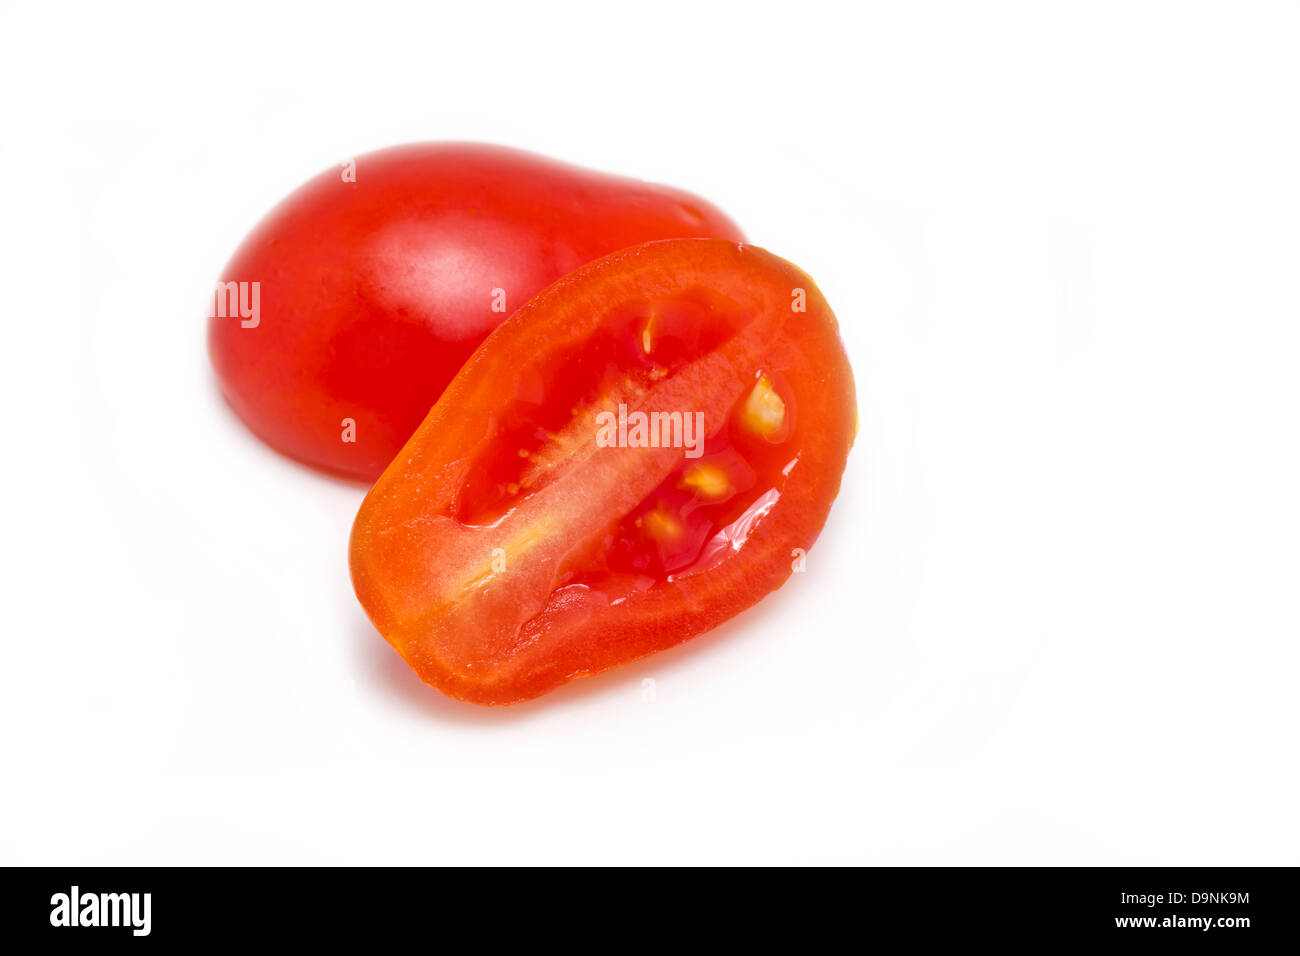 Grape or cherry tomatoes isolated on white background. Stock Photo